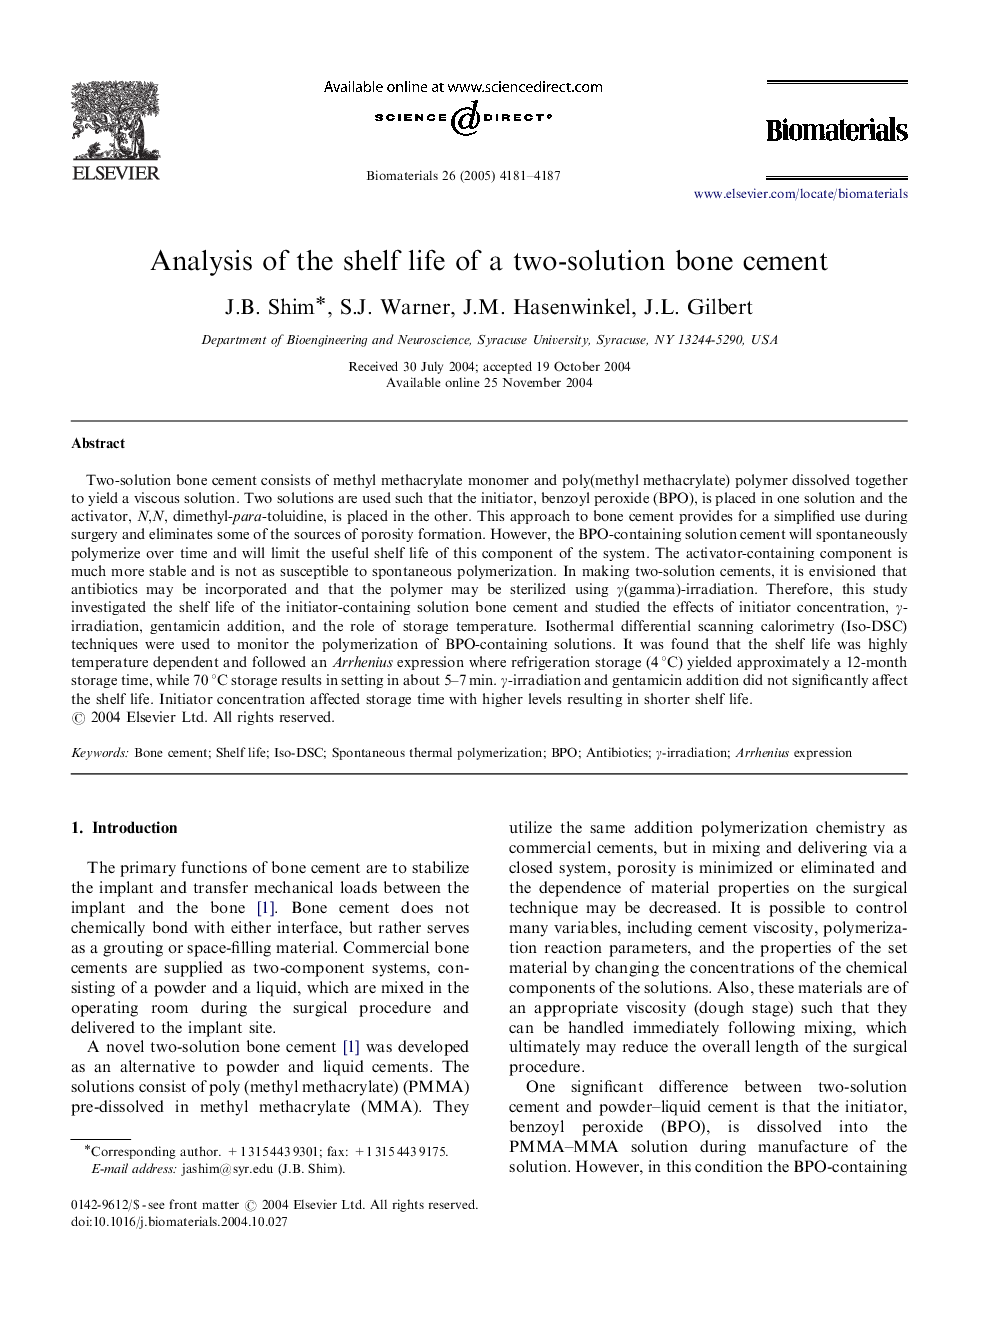 Analysis of the shelf life of a two-solution bone cement